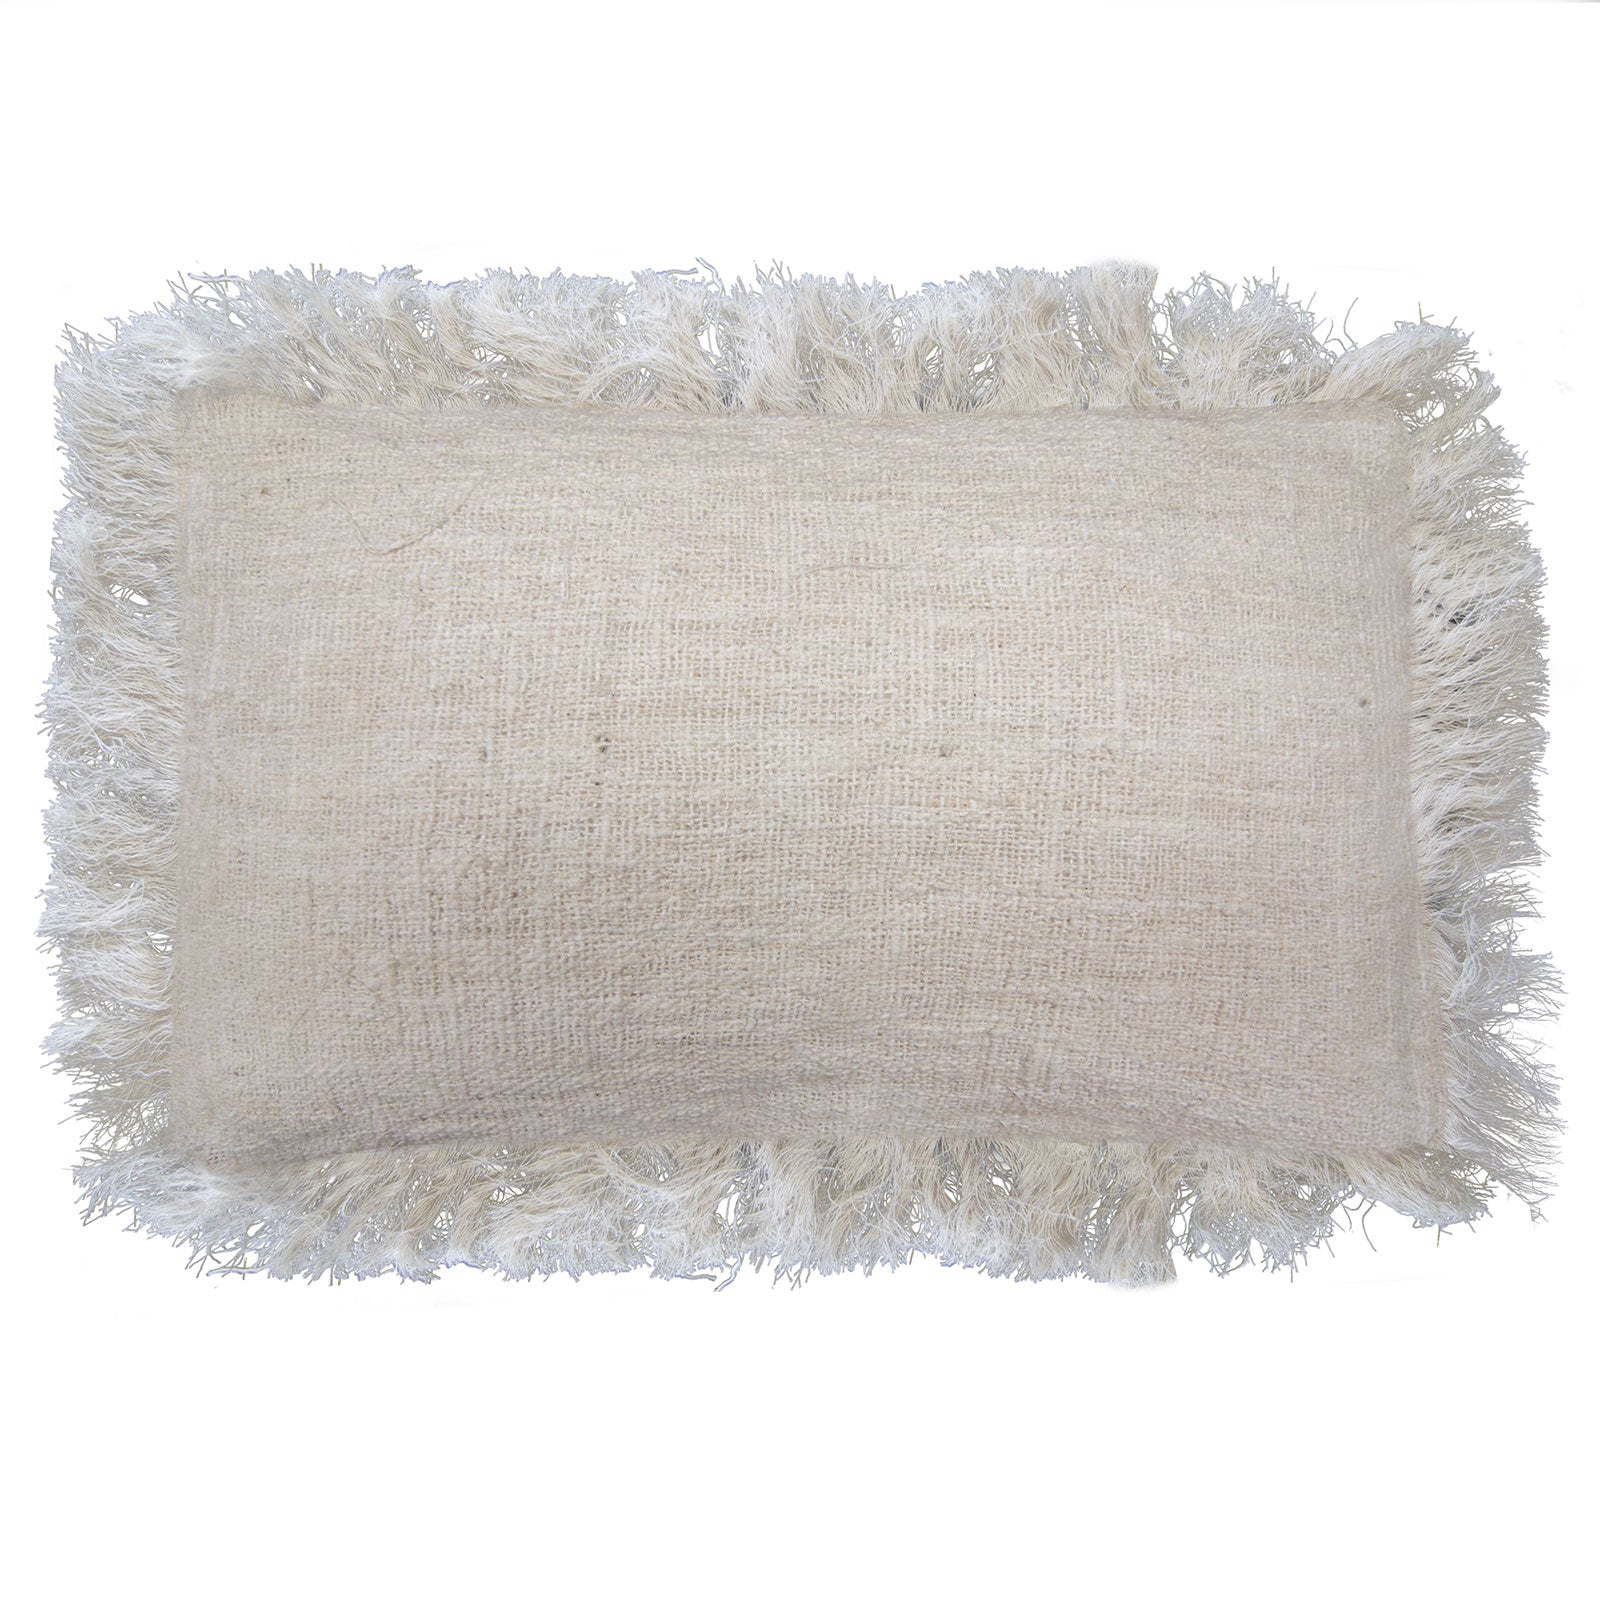 View Linen Cushion 30x50cm with fringe information